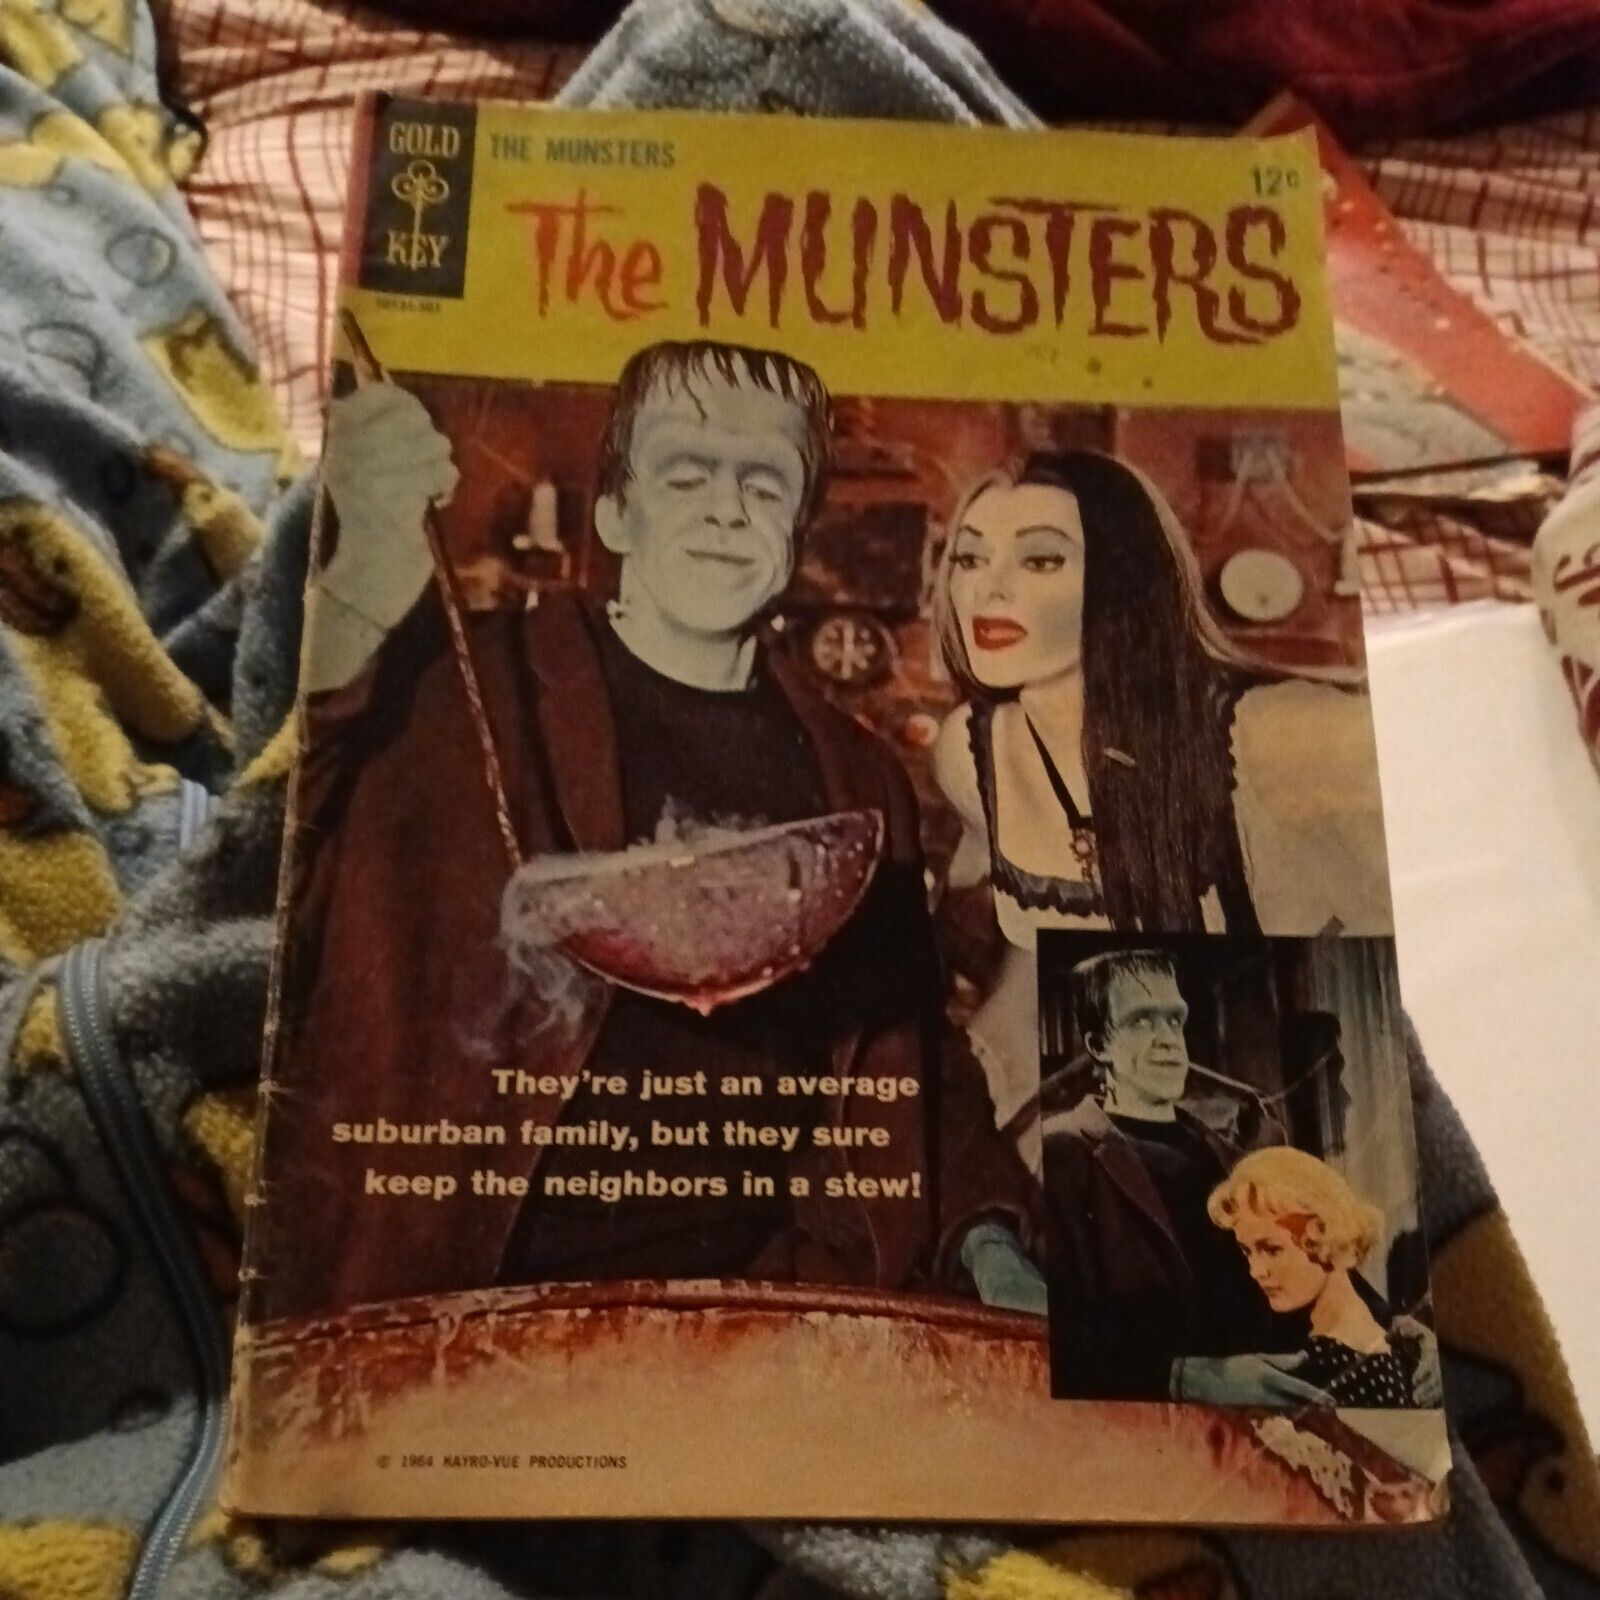 vtg 1965 The Munsters Monster Comic Book #1 1st app rob zombie GOLD KEY